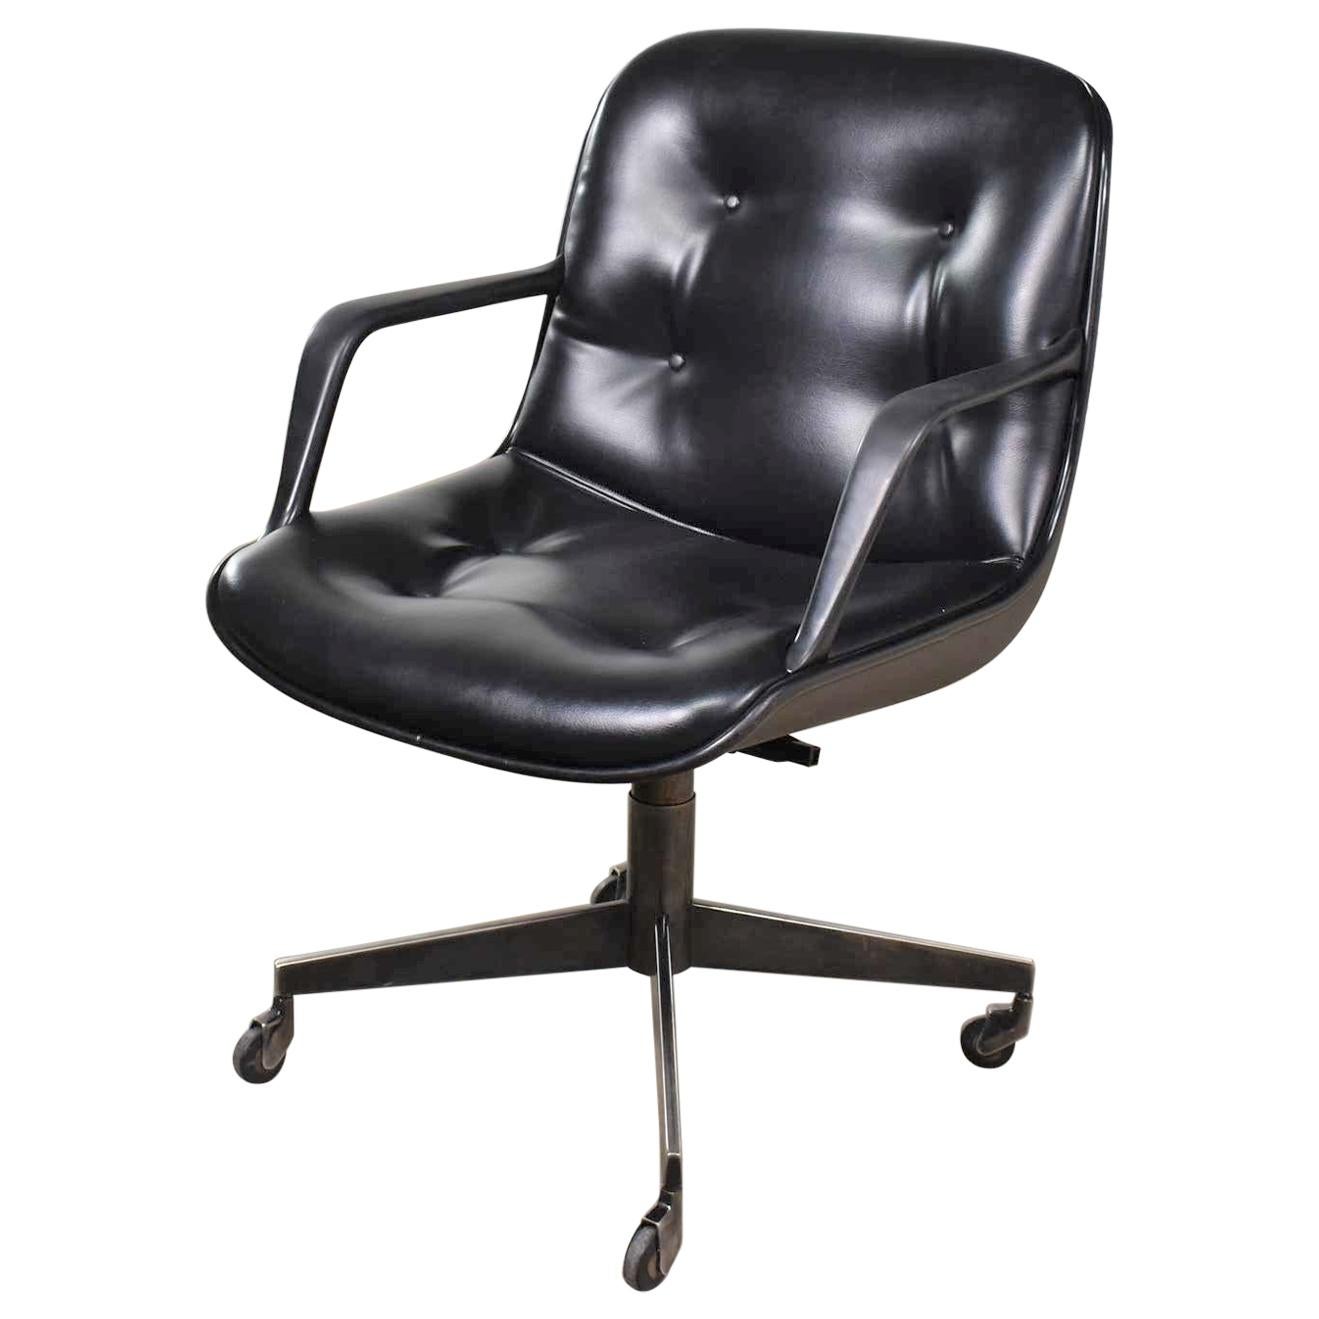 Vintage Modern Black Vinyl Faux Leather Steelcase 451 Office Chair Style Pollock